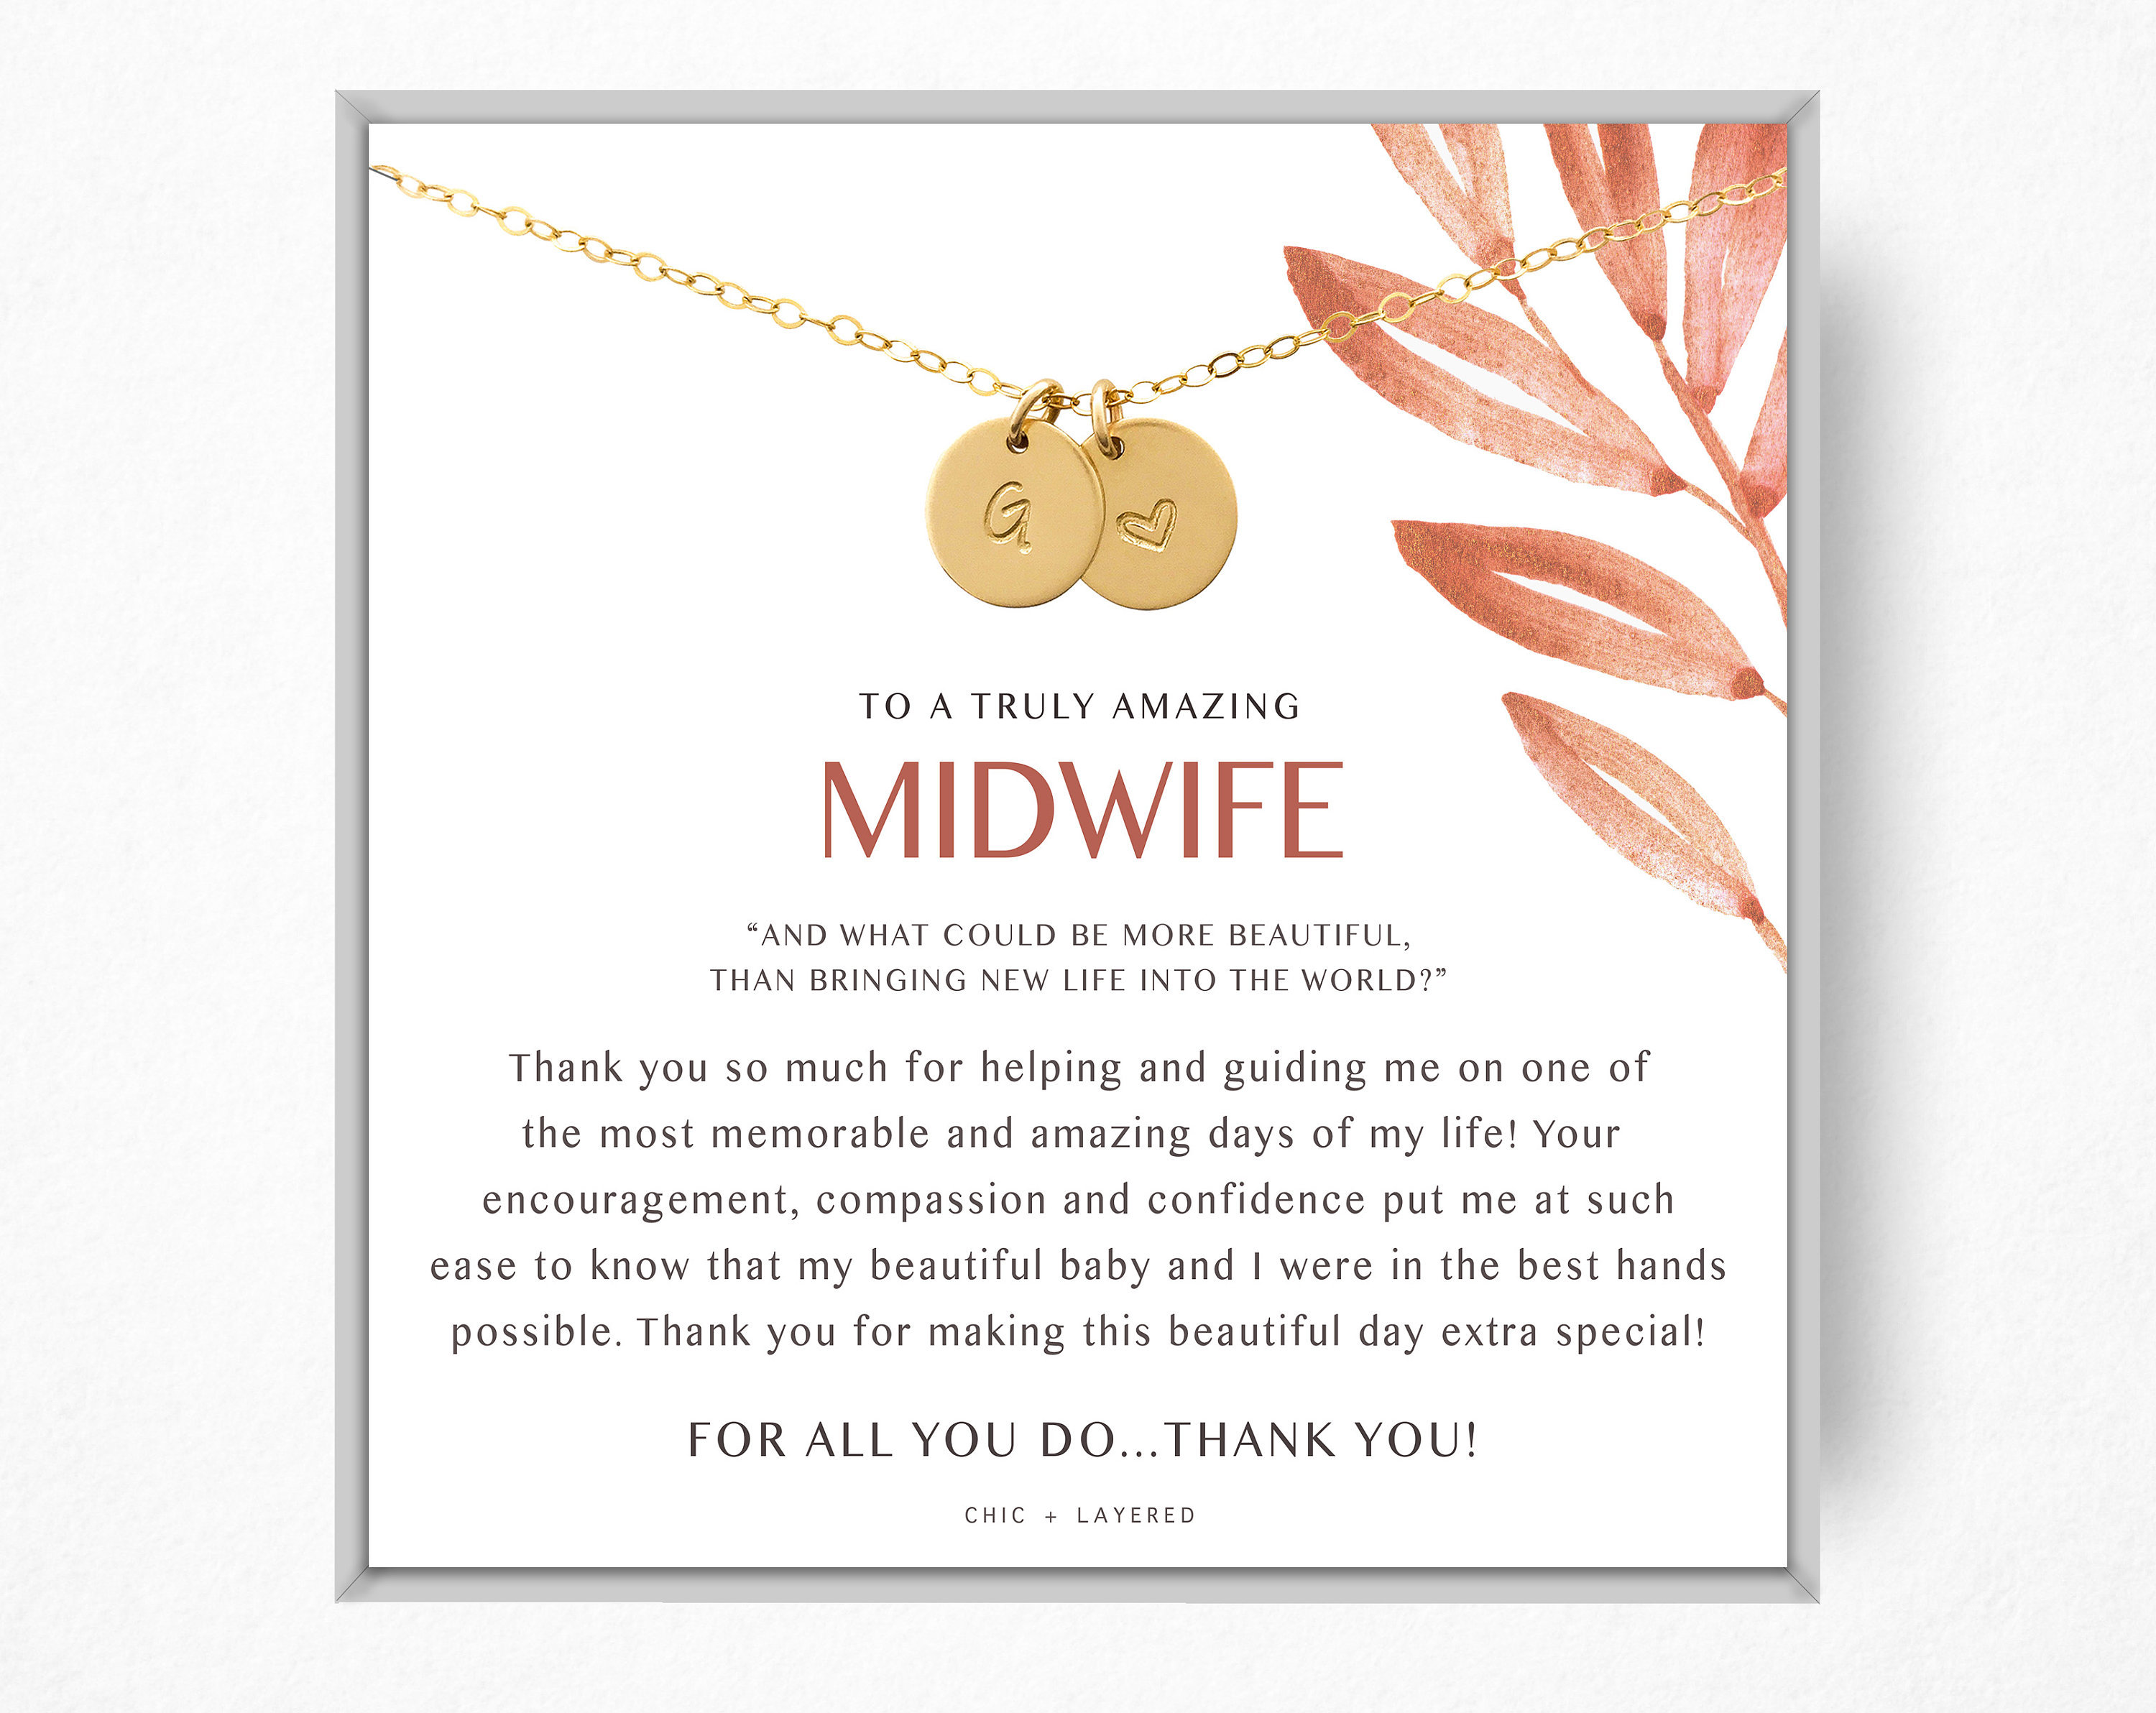 Midwife and Life - Gift Guide For 6 Year Old Boys - Midwife and Life